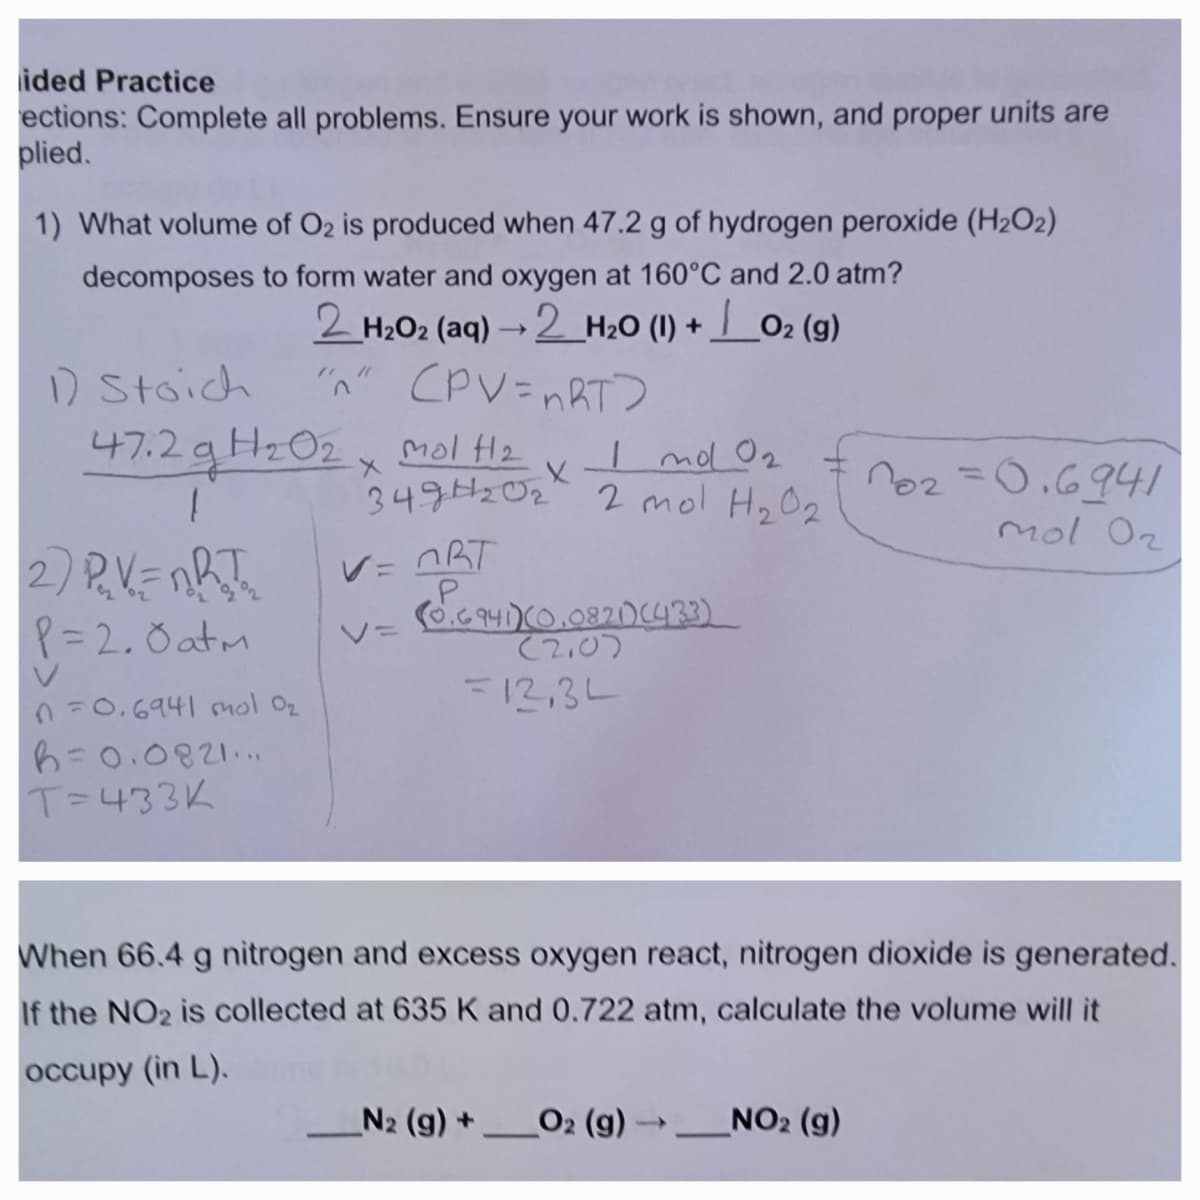 ided Practice
ections: Complete all problems. Ensure your work is shown, and proper units are
plied.
1) What volume of O2 is produced when 47.2 g of hydrogen peroxide (H₂O2)
decomposes to form water and oxygen at 160°C and 2.0 atm?
2_H2Oz (aq) — 2_H2O (I) + |_Oz (9)
02
"n" (PV=nRT?
1) Stoich
47.2 g H₂0₂
H2O2
1
2) P₁₂V=nRT₁₂
P=2.0 atm
n=0.6941 mol O₂
b=0.0821...
T=433K
mol H2
349H₂0₂² 2 mol H₂0₂
Inol 0₂
X
V=ORT
авт
V=
(0.6 941)(0.0821) (433)
(2.0)
=12,34
102=0.6941
mol O₂
When 66.4 g nitrogen and excess oxygen react, nitrogen dioxide is generated.
If the NO₂ is collected at 635 K and 0.722 atm, calculate the volume will it
occupy (in L).
_N2 (g) + O2 (g) → __NO2 (g)